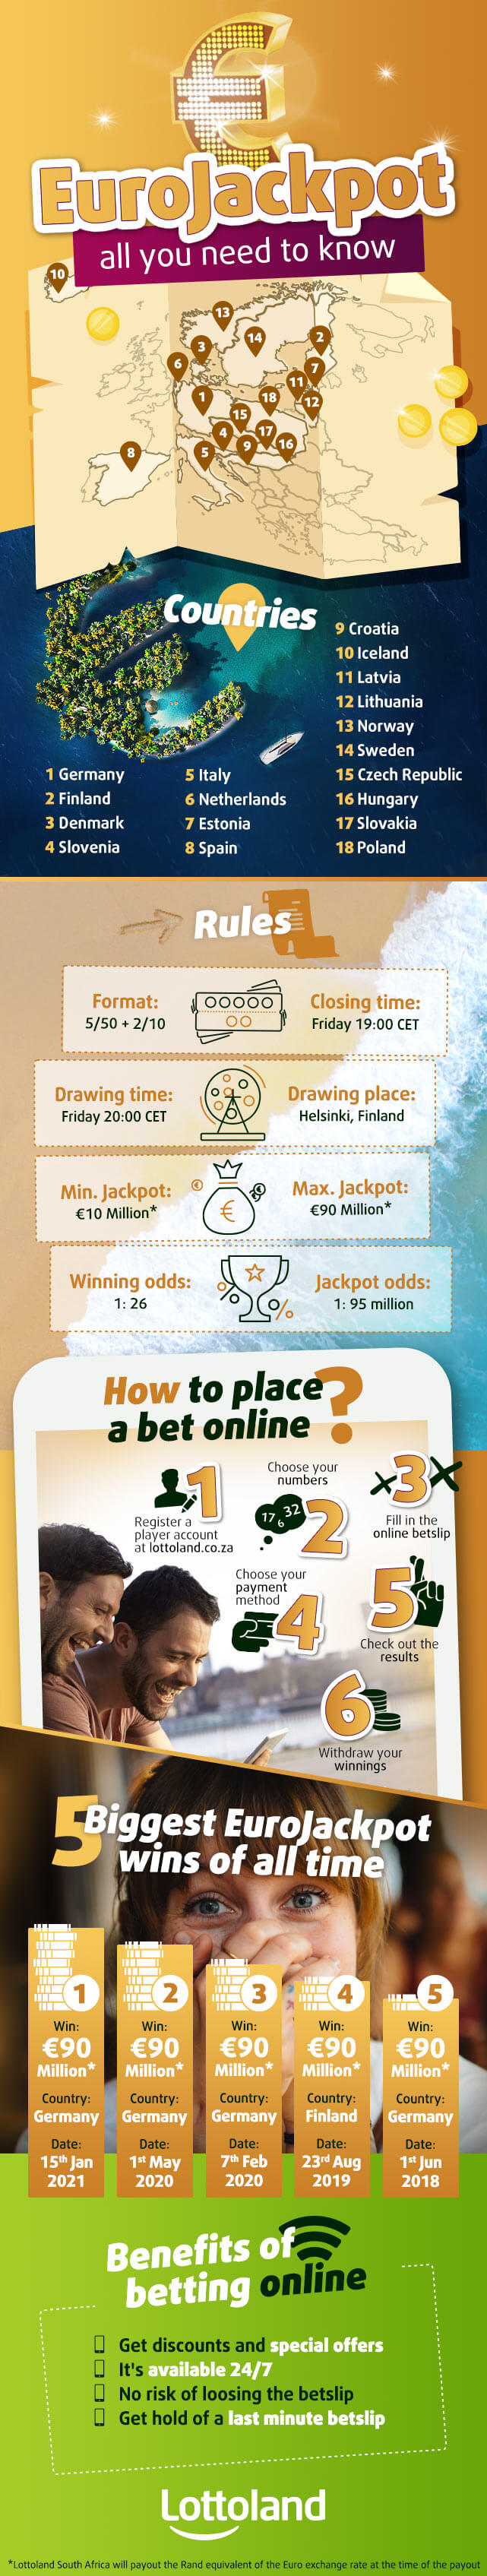 Infographic on how to bet on EuroJackpot online